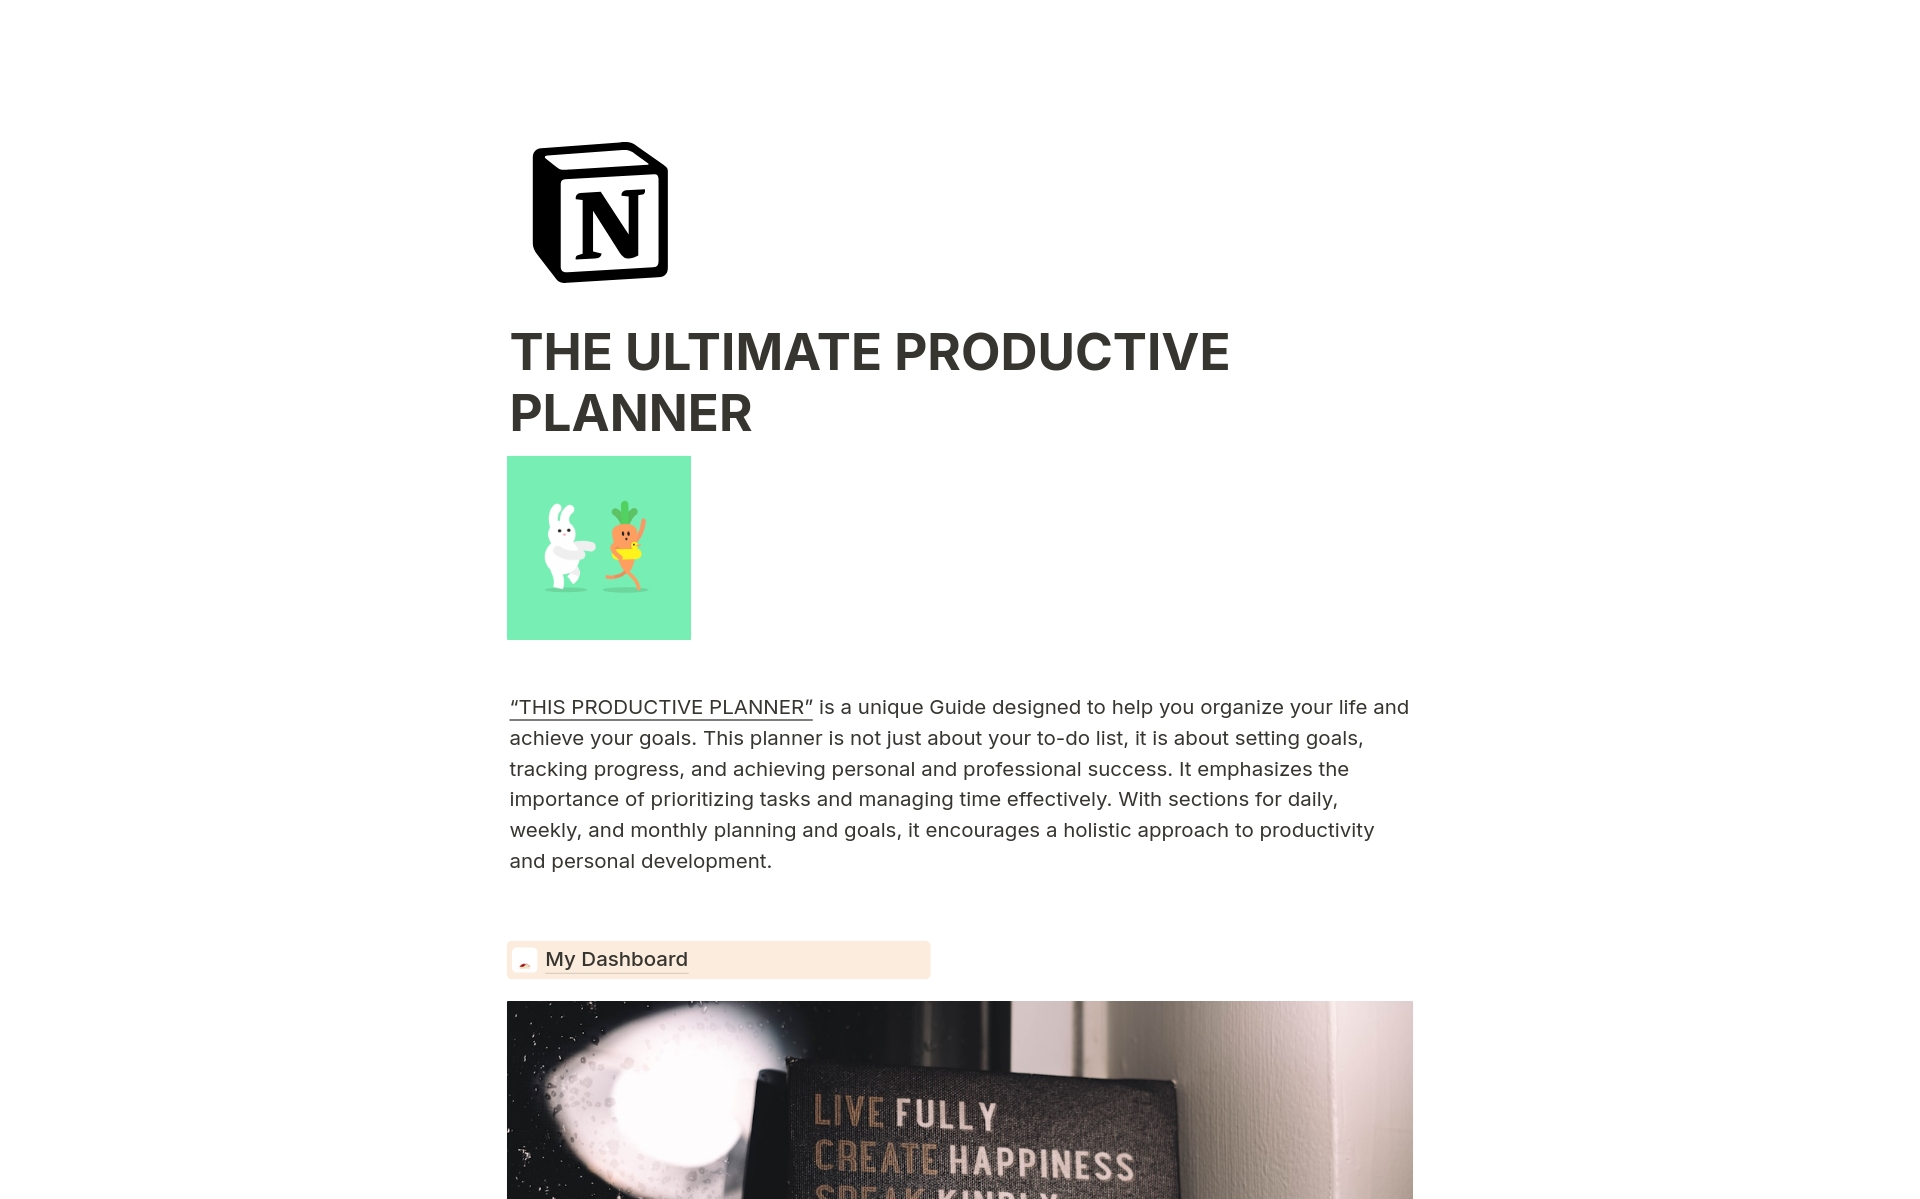 “THIS PRODUCTIVE PLANNER” is a unique Guide designed to help you organize your life and achieve your goals. This planner is not just about your to-do list, it is about setting goals, tracking progress, and achieving personal and professional success. 